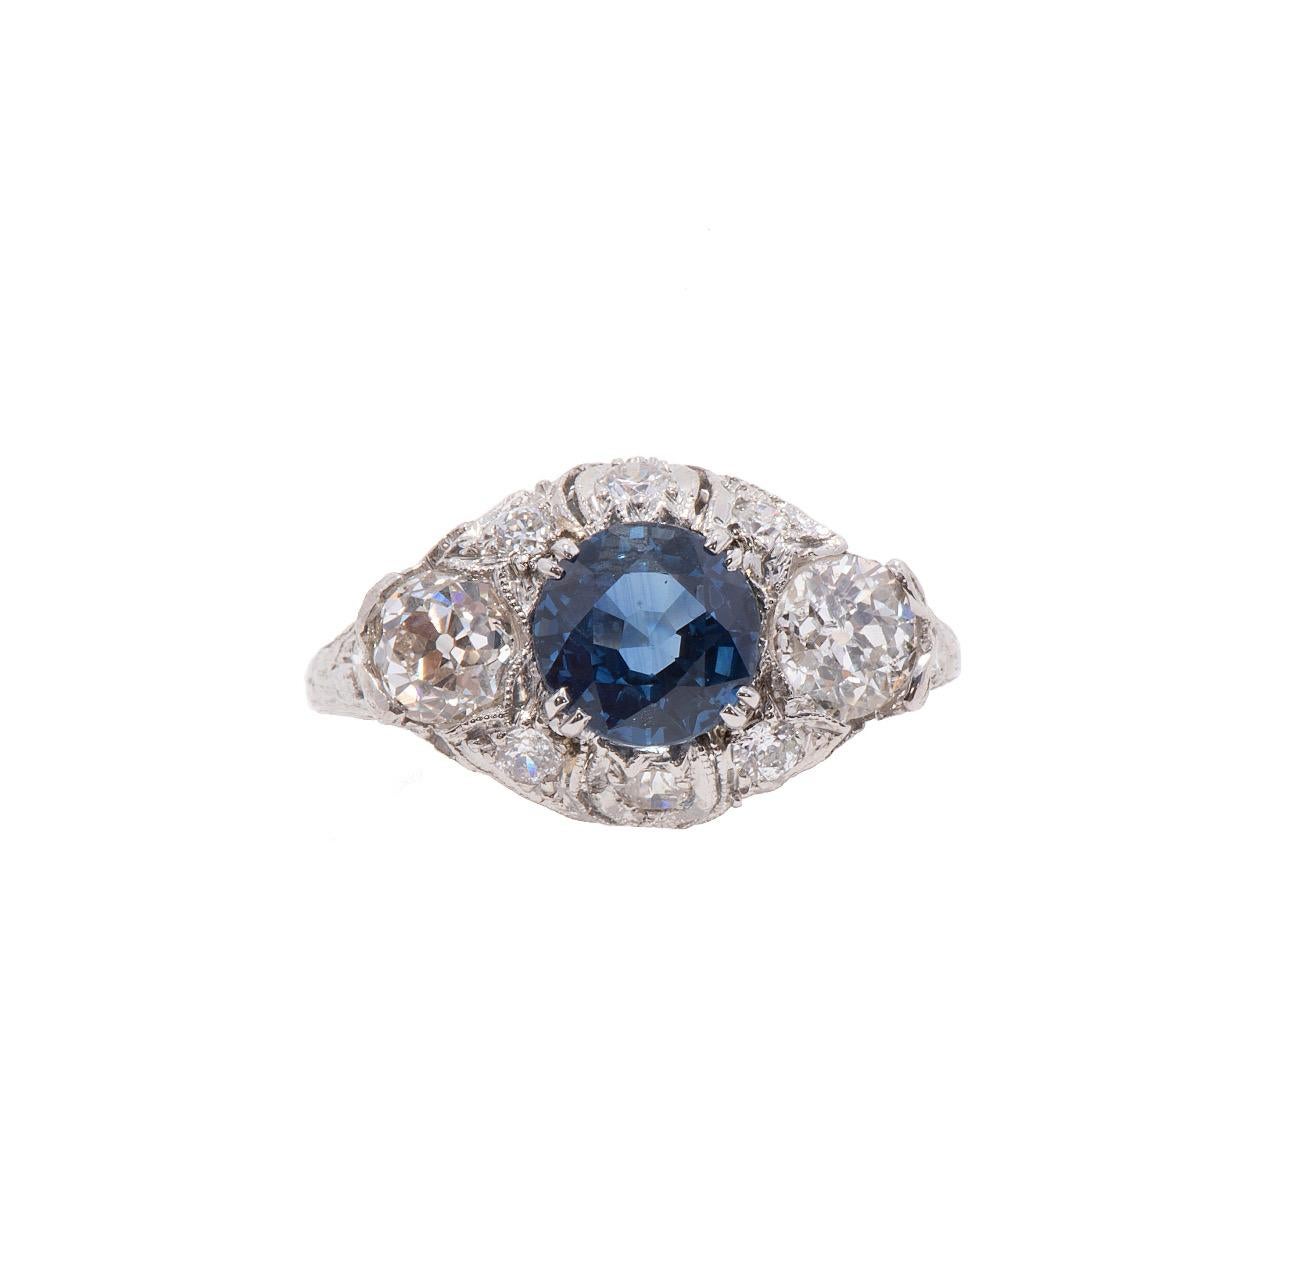 Women's Art Deco 1.64 Carat Natural Sapphire and Diamond Ring - AGL  For Sale